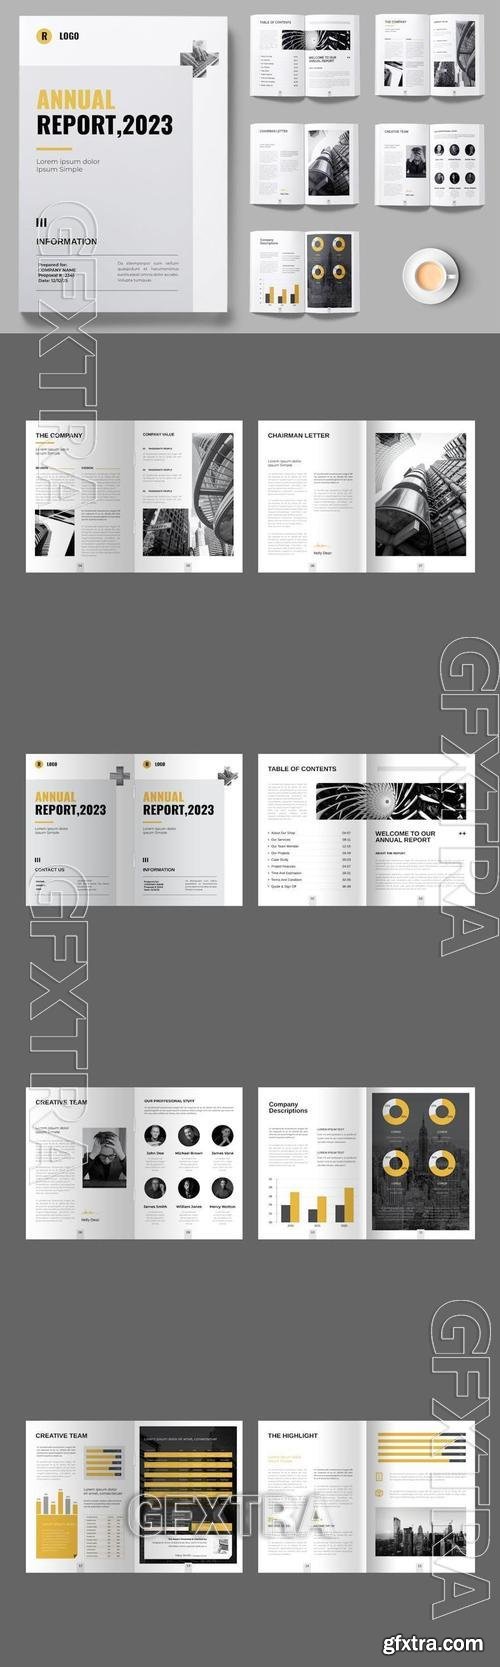 Annual Report 2023 Layout DB4FXG6